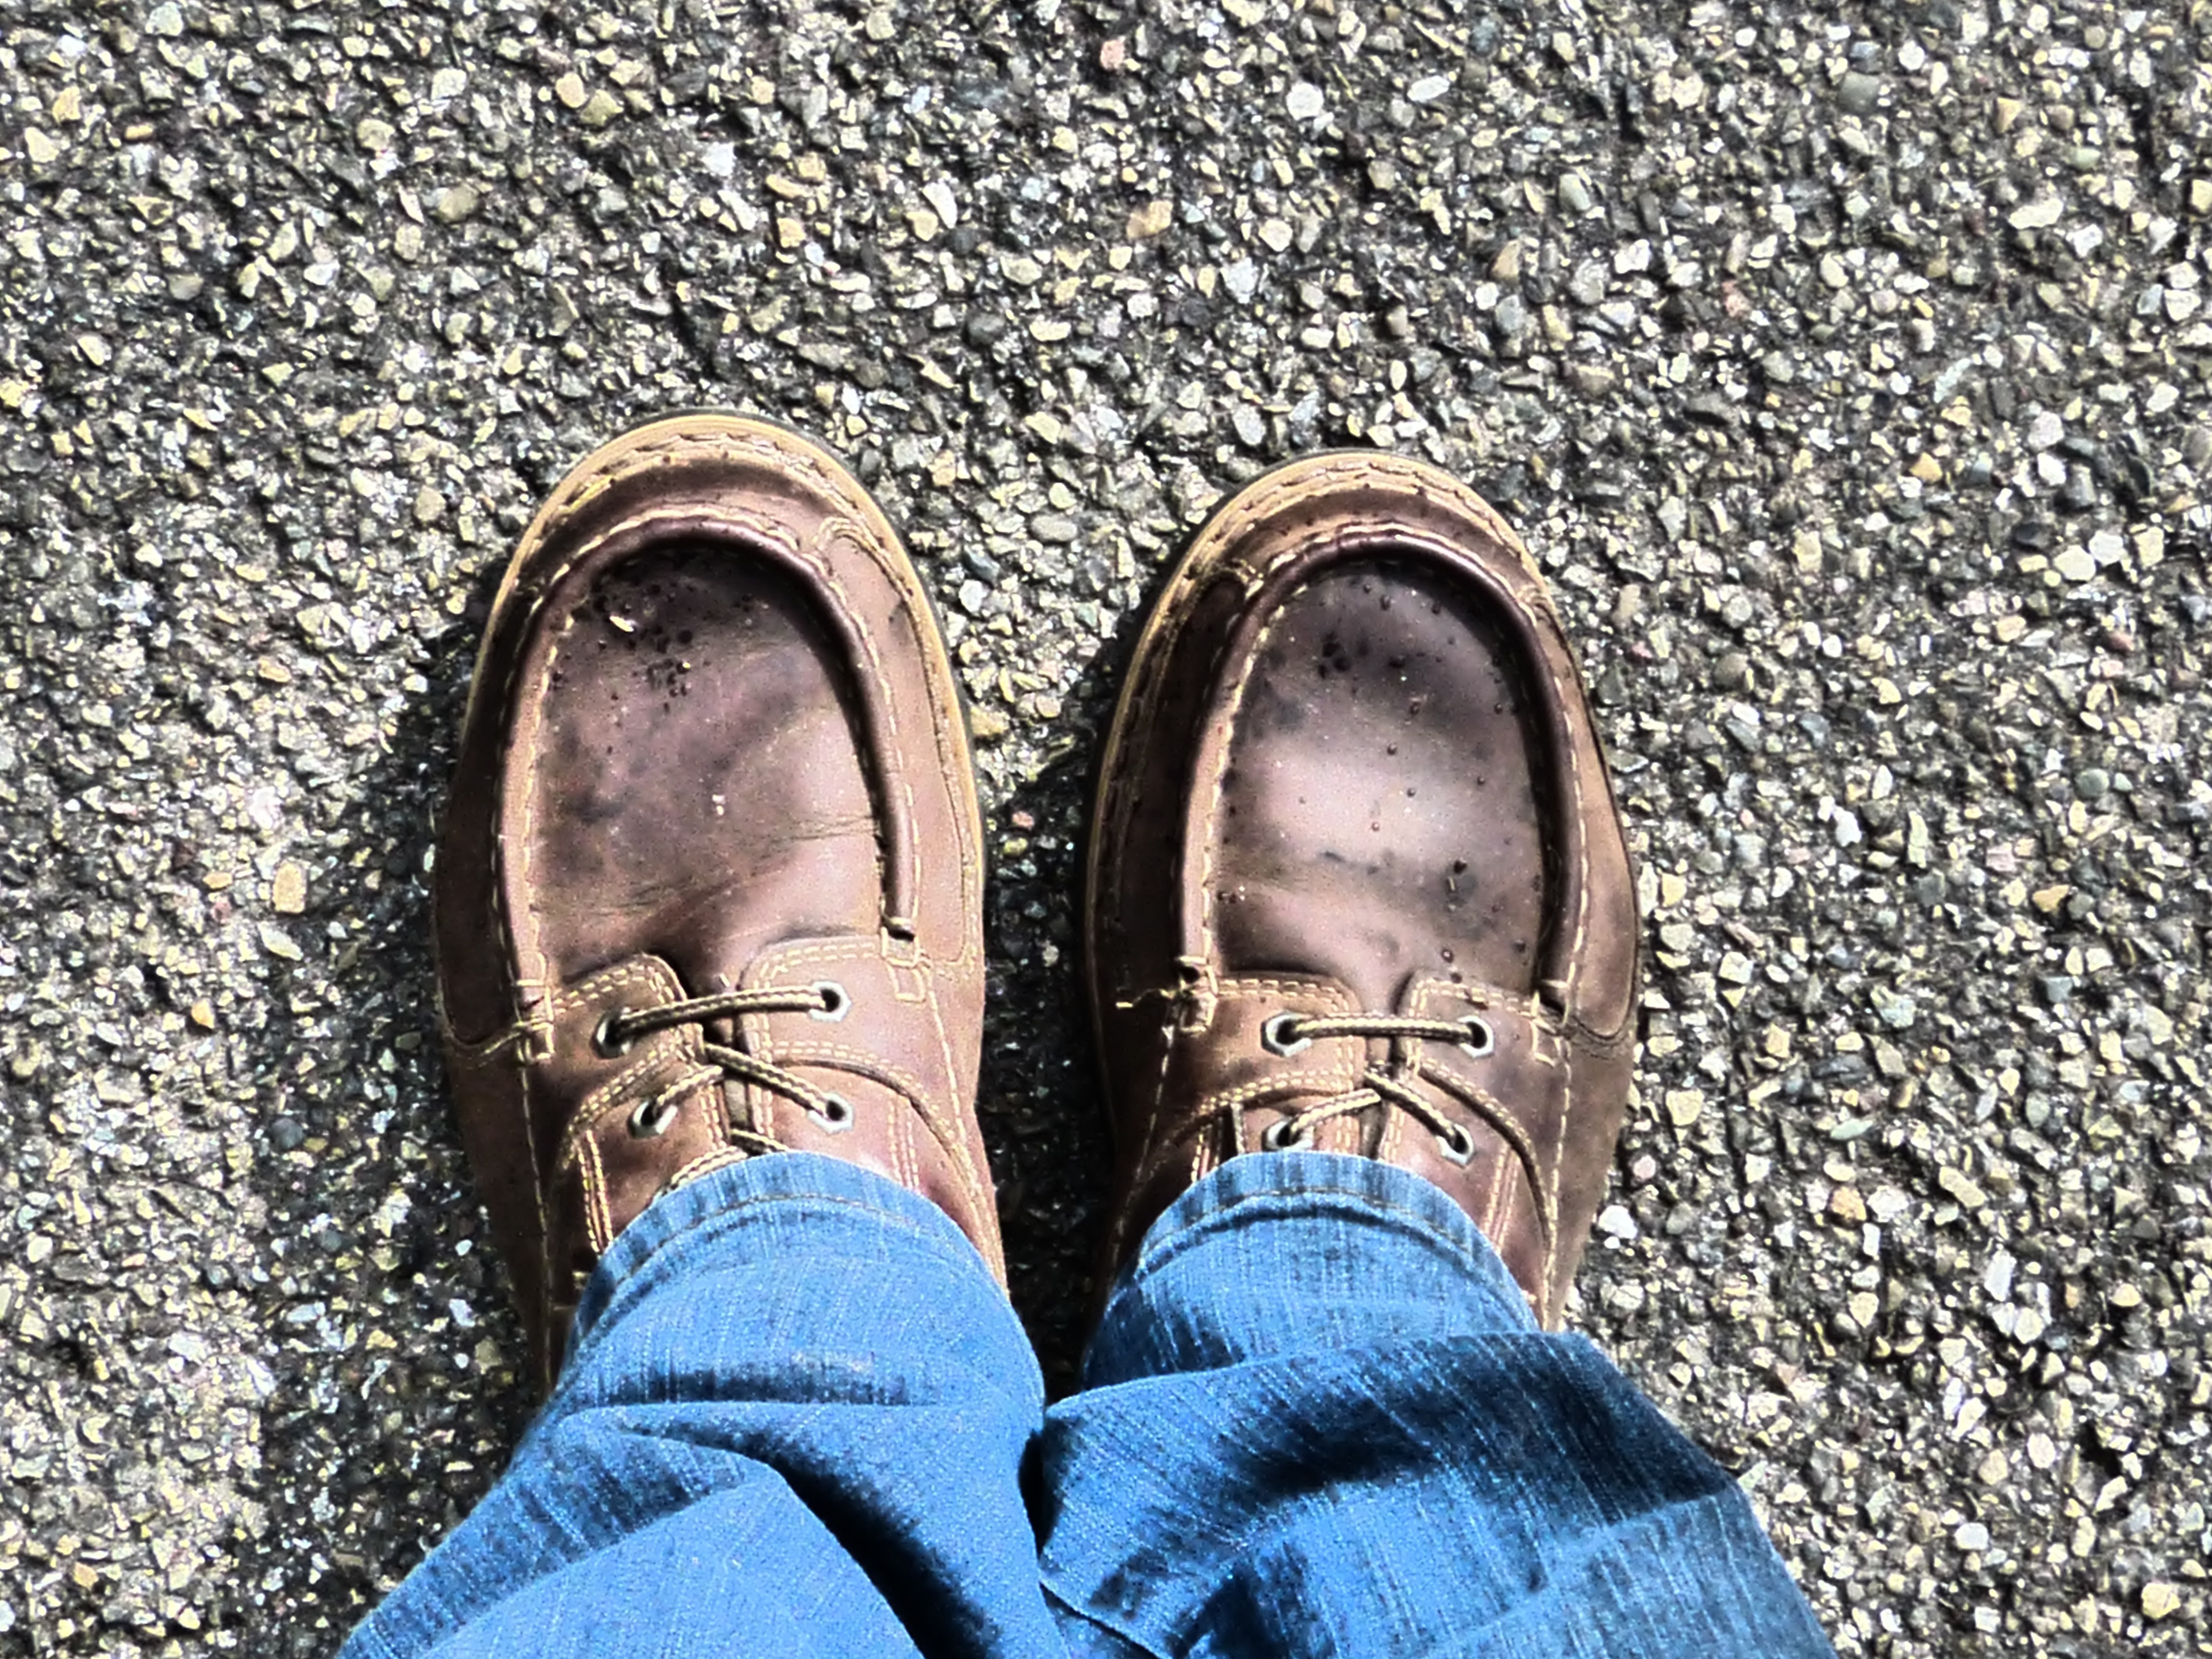 person taking photo of pair of brown leather boat shoes